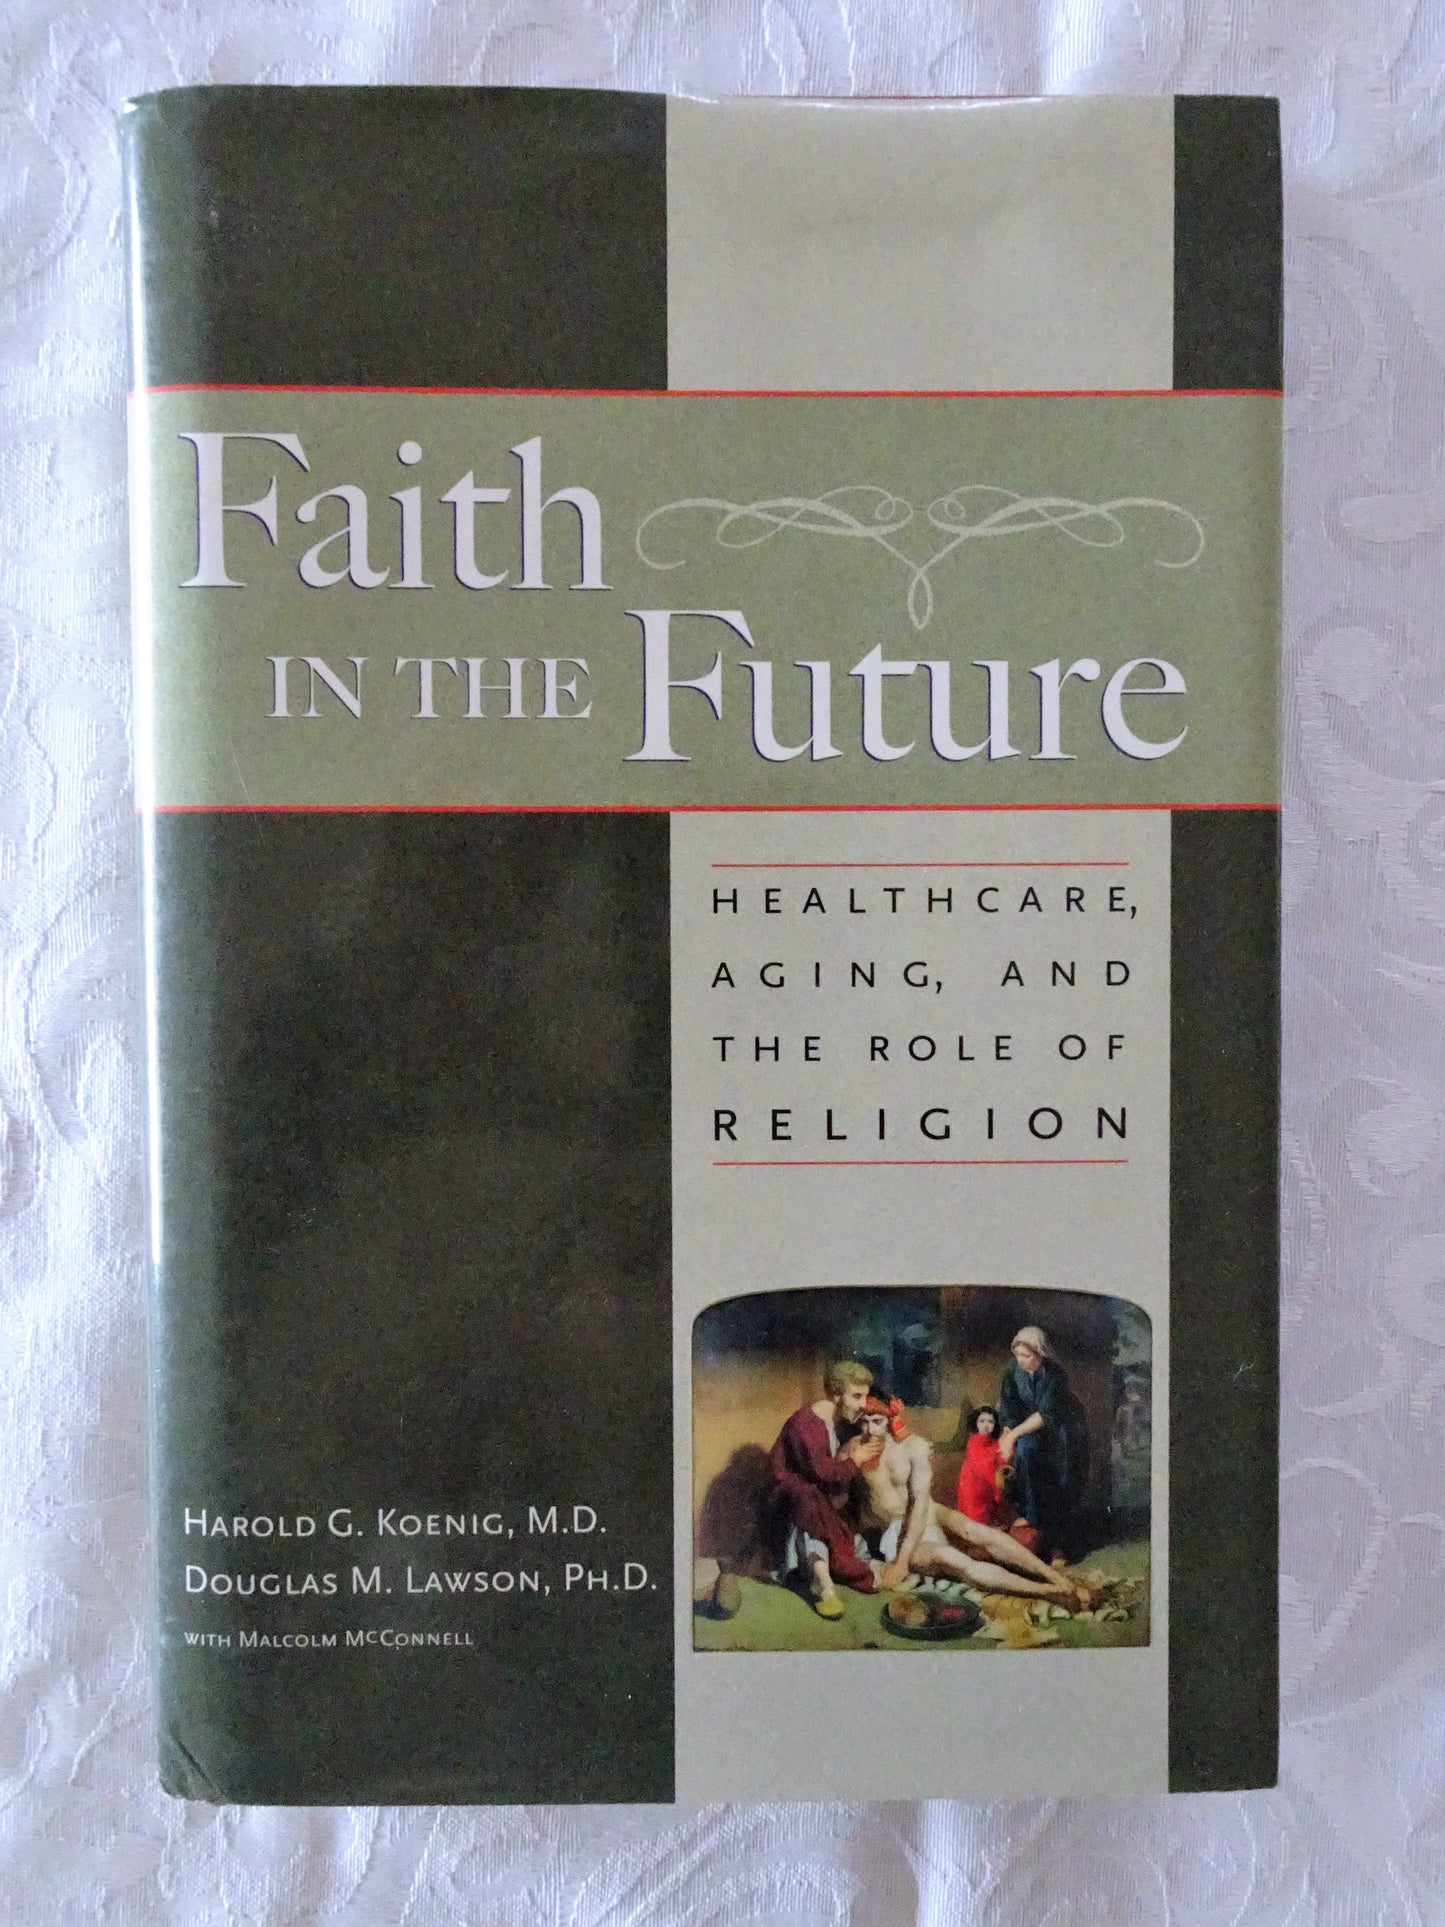 Faith in the Future by Harold G. Koenig and Douglas M. Lawson